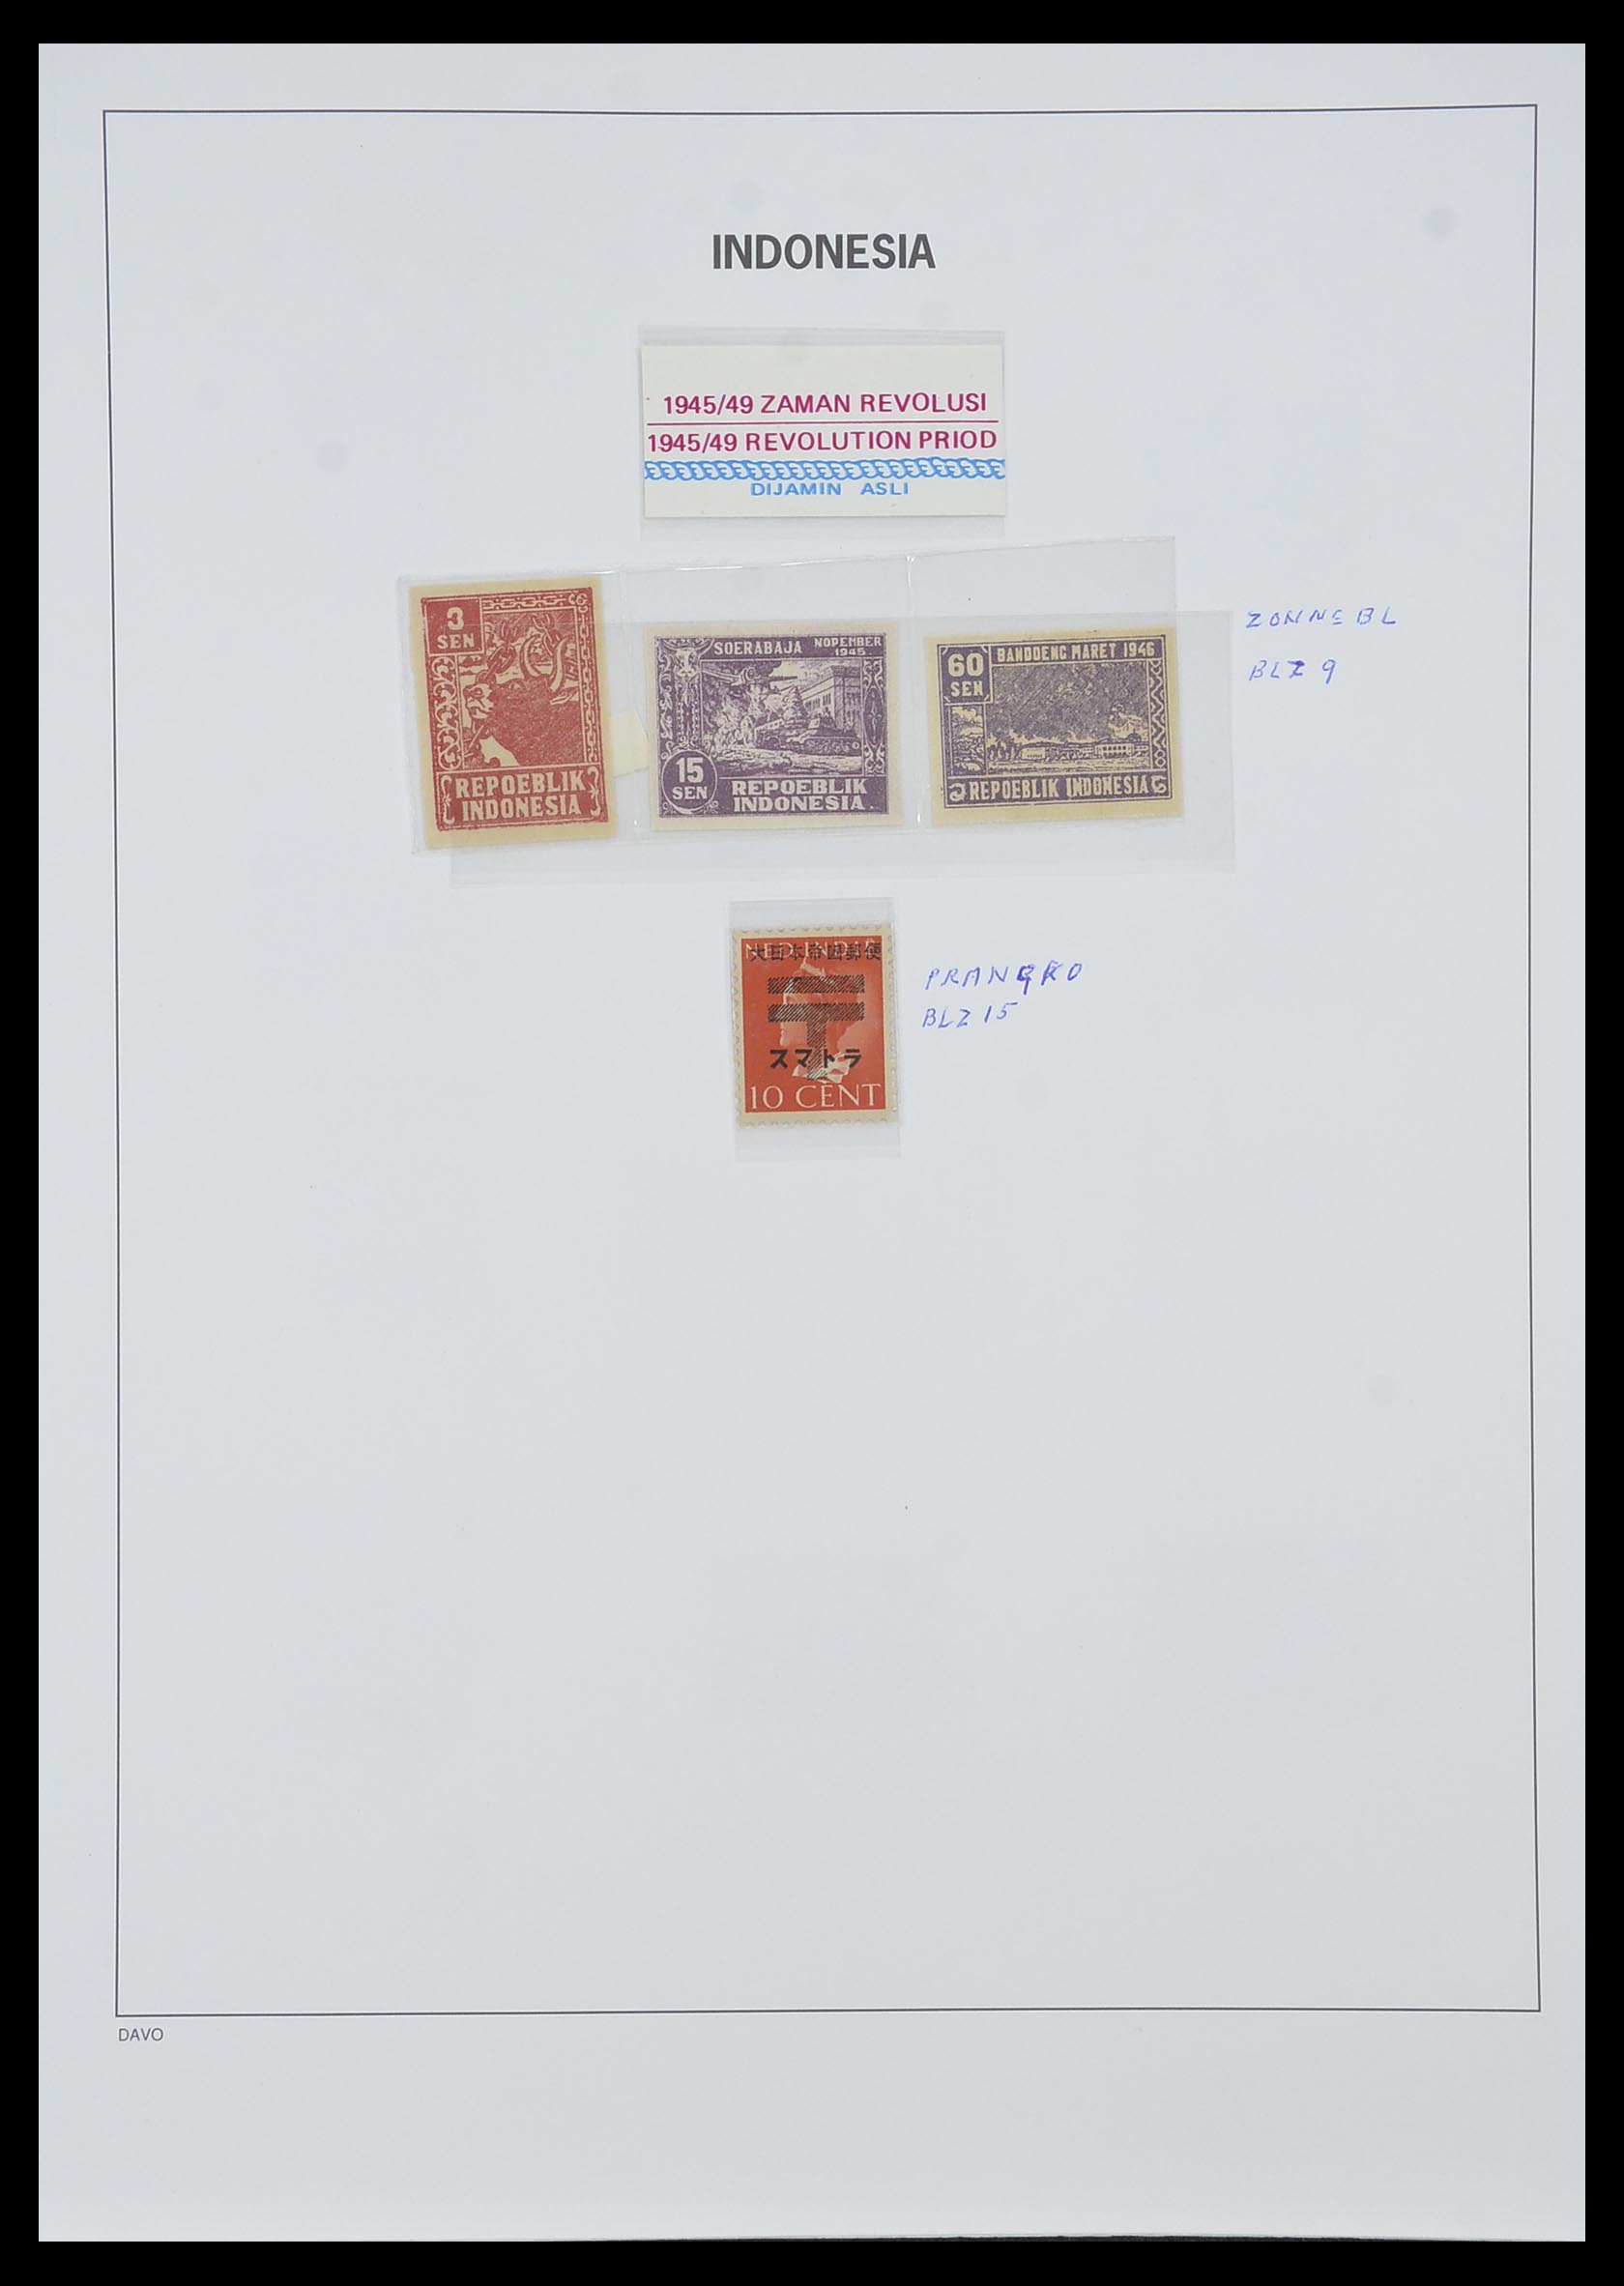 33988 006 - Stamp collection 33988 Vienna printings Indonesia.